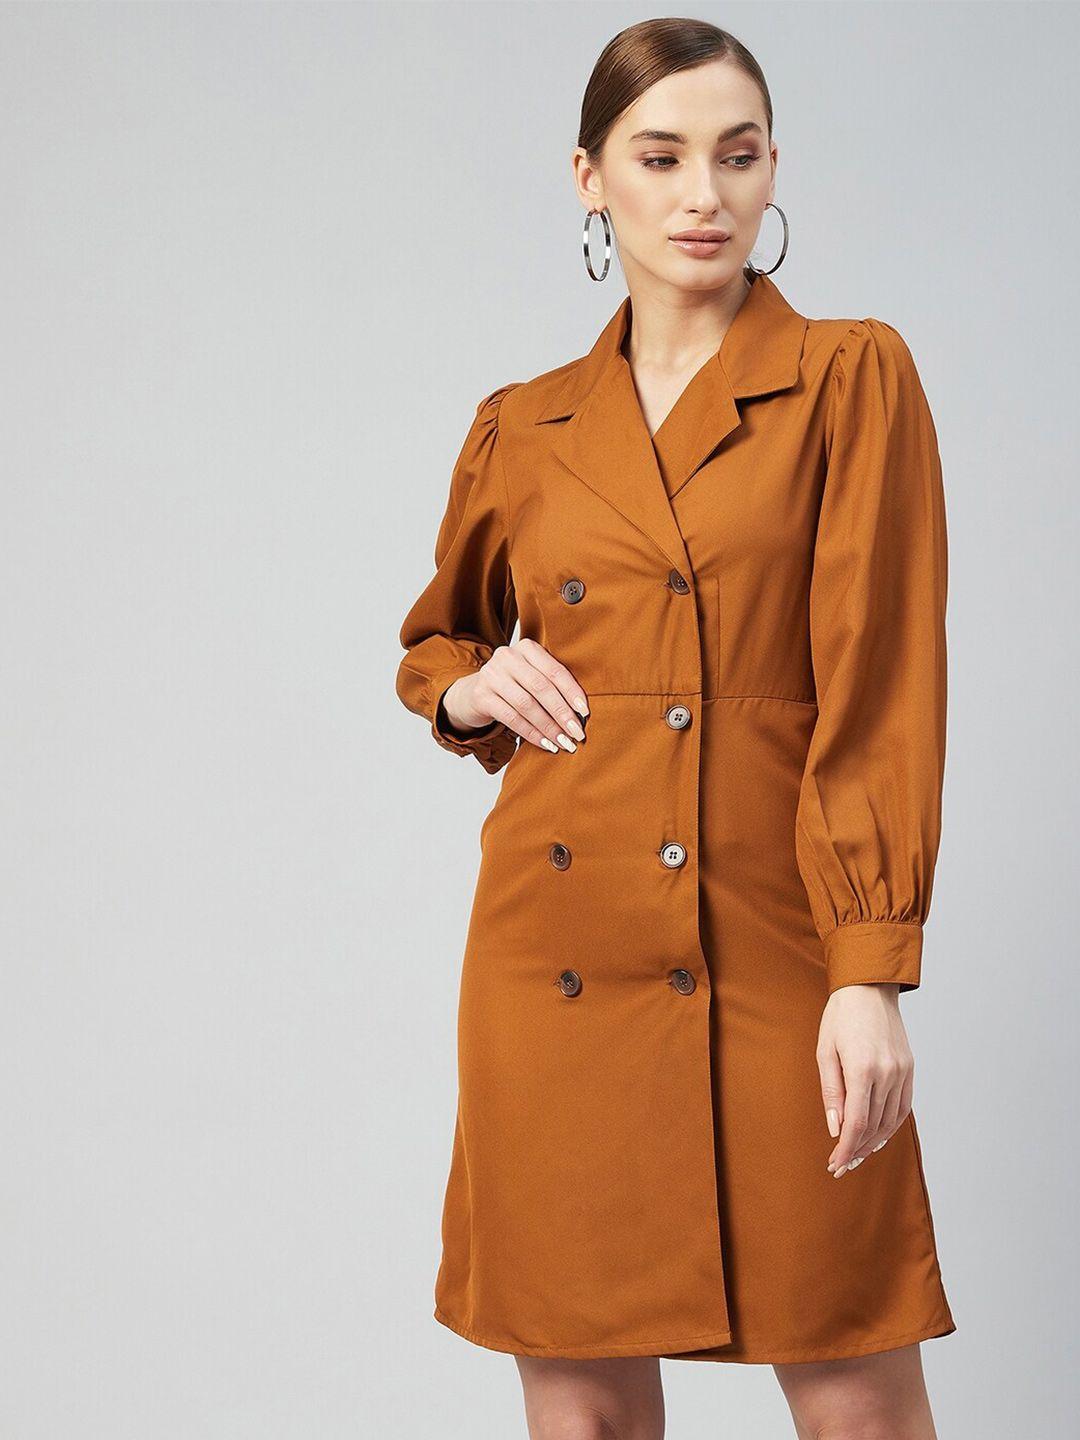 carlton-london-camel-brown-solid-double-breasted-blazer-dress